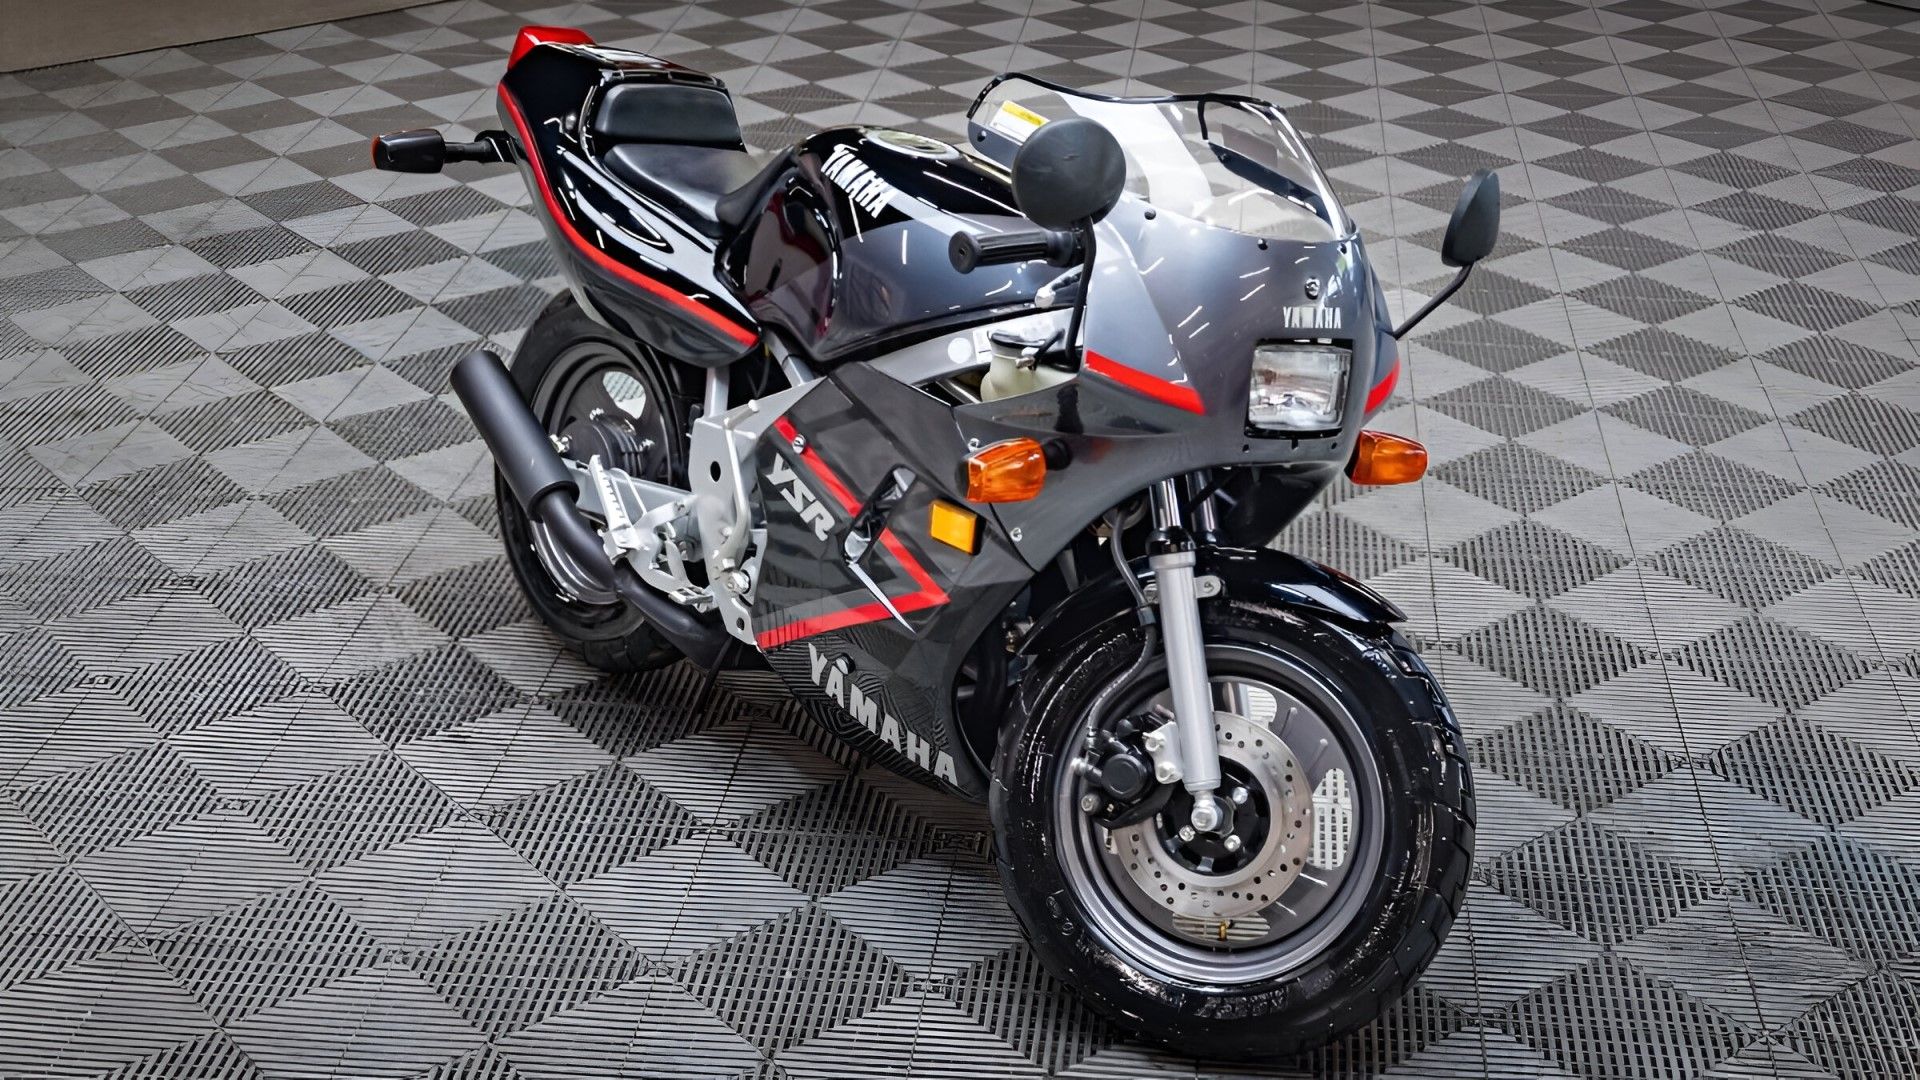 Here's Why The Yamaha YSR80 Is A Desirable 80s Sport Bike